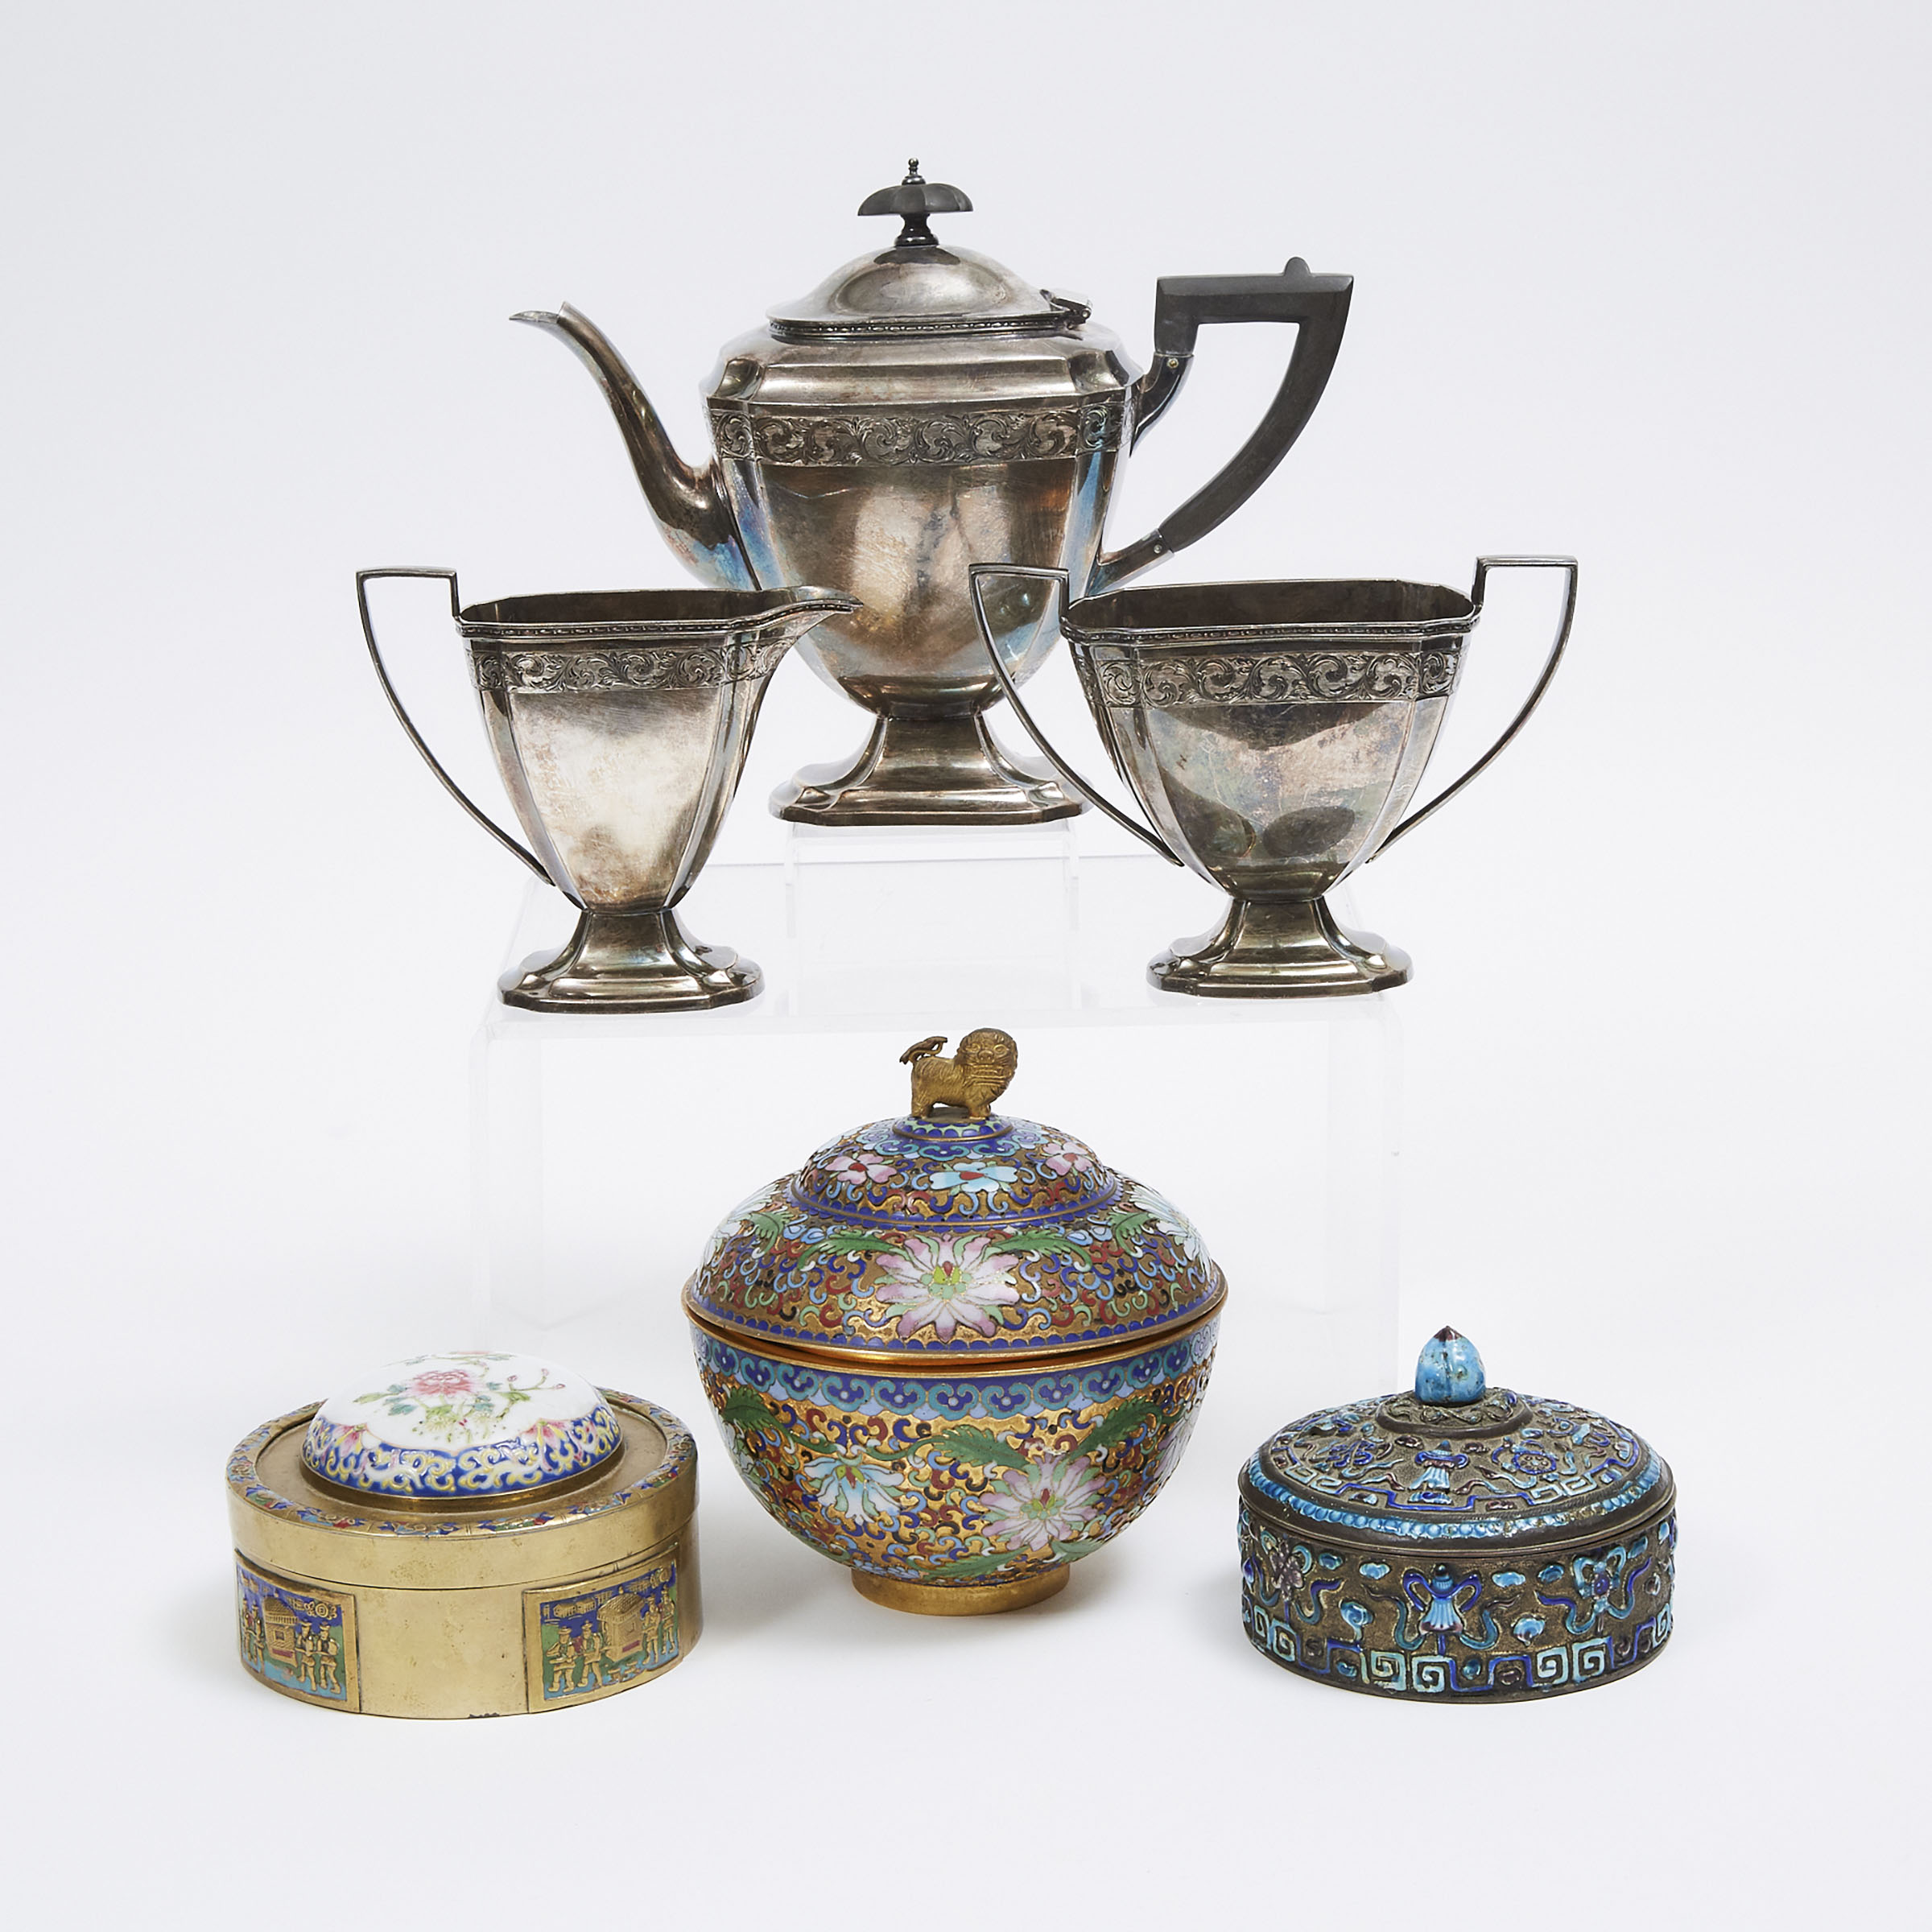 A Group of Six Chinese Metal Wares